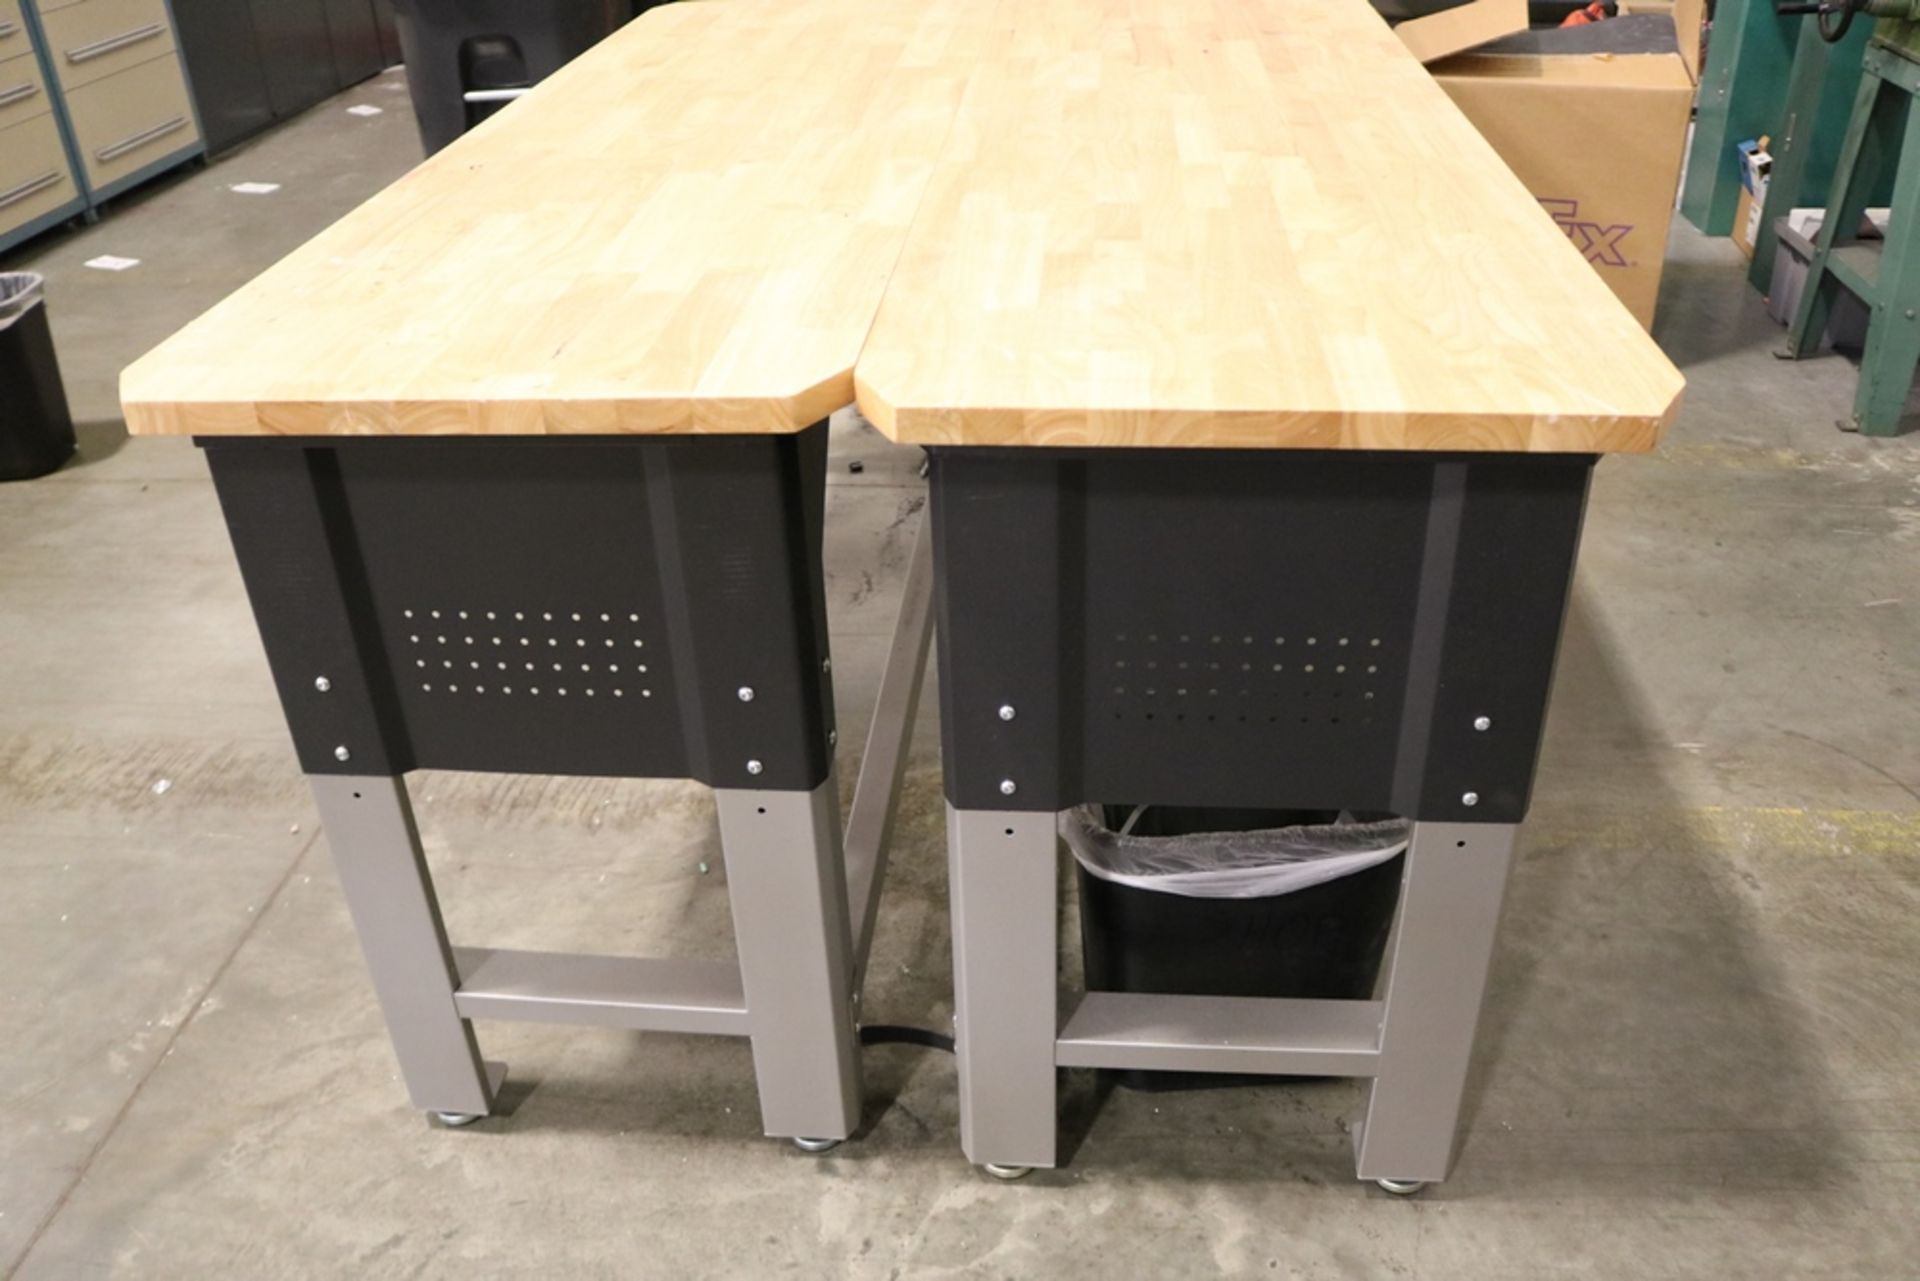 (2) Kobalt Wood Top Adjustable Work Benches 6' x 2' 34 1/2" (L x W x H) - Image 3 of 4